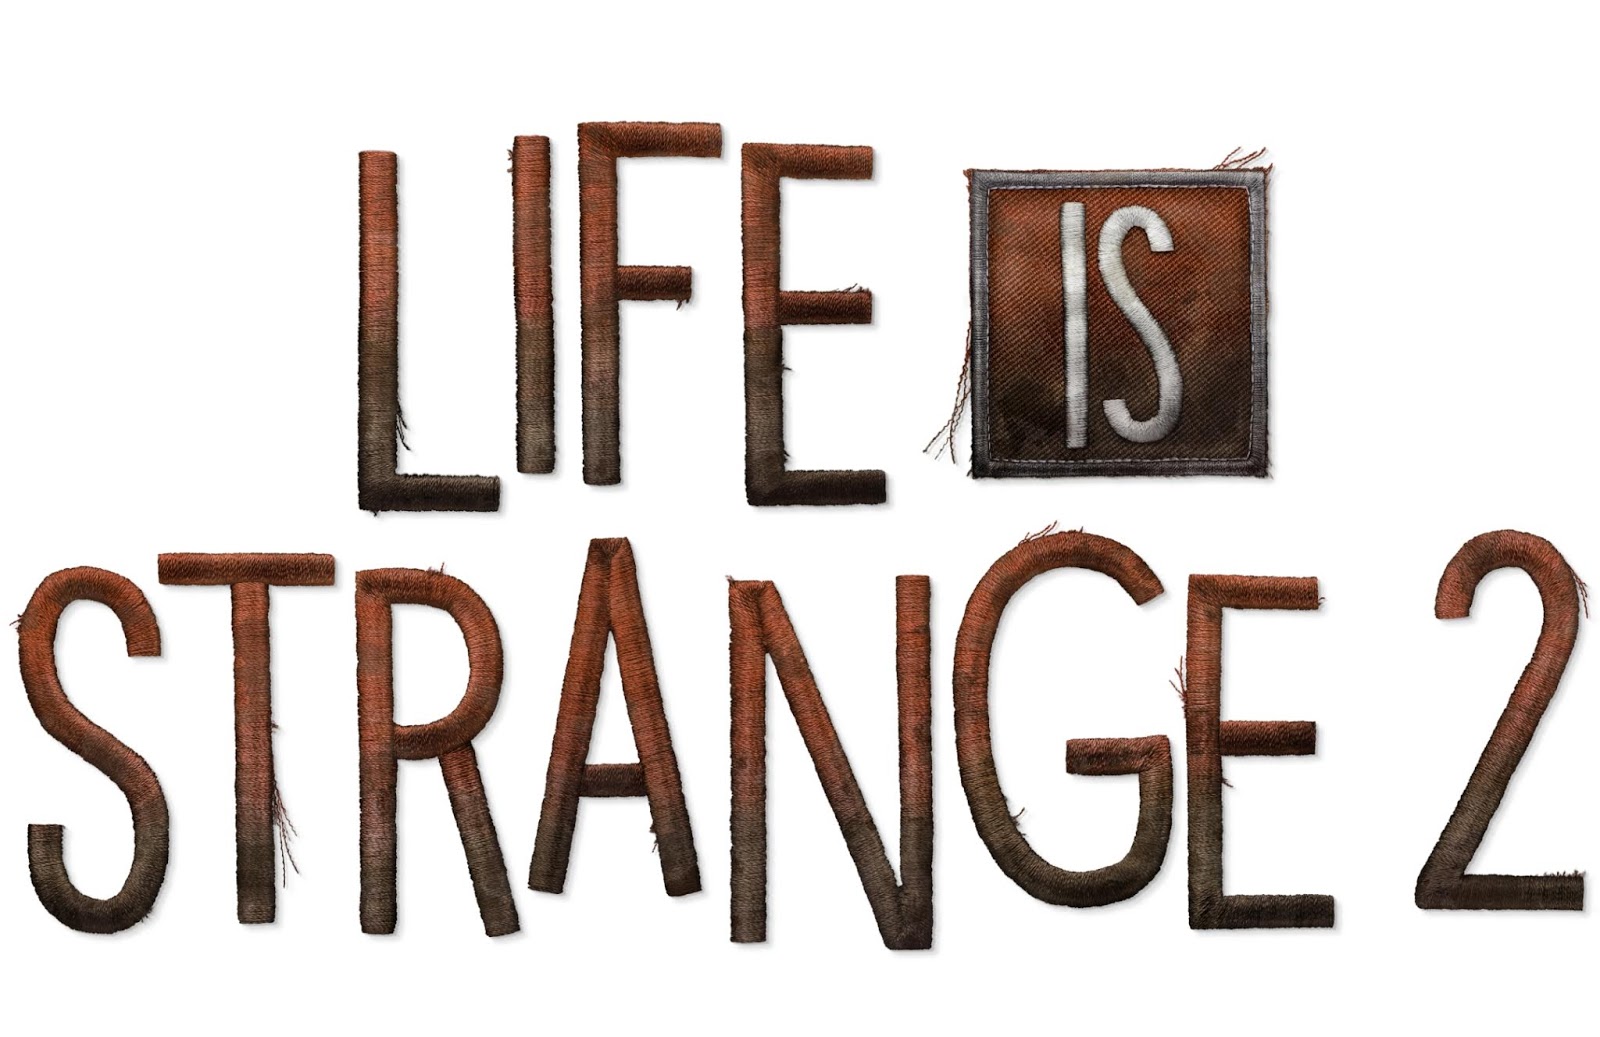 Life is serious. Life is Strange логотип. Life is Strange 2 logo. Life is Strange 2 эпизод 1 лого. Life is Strange надпись.